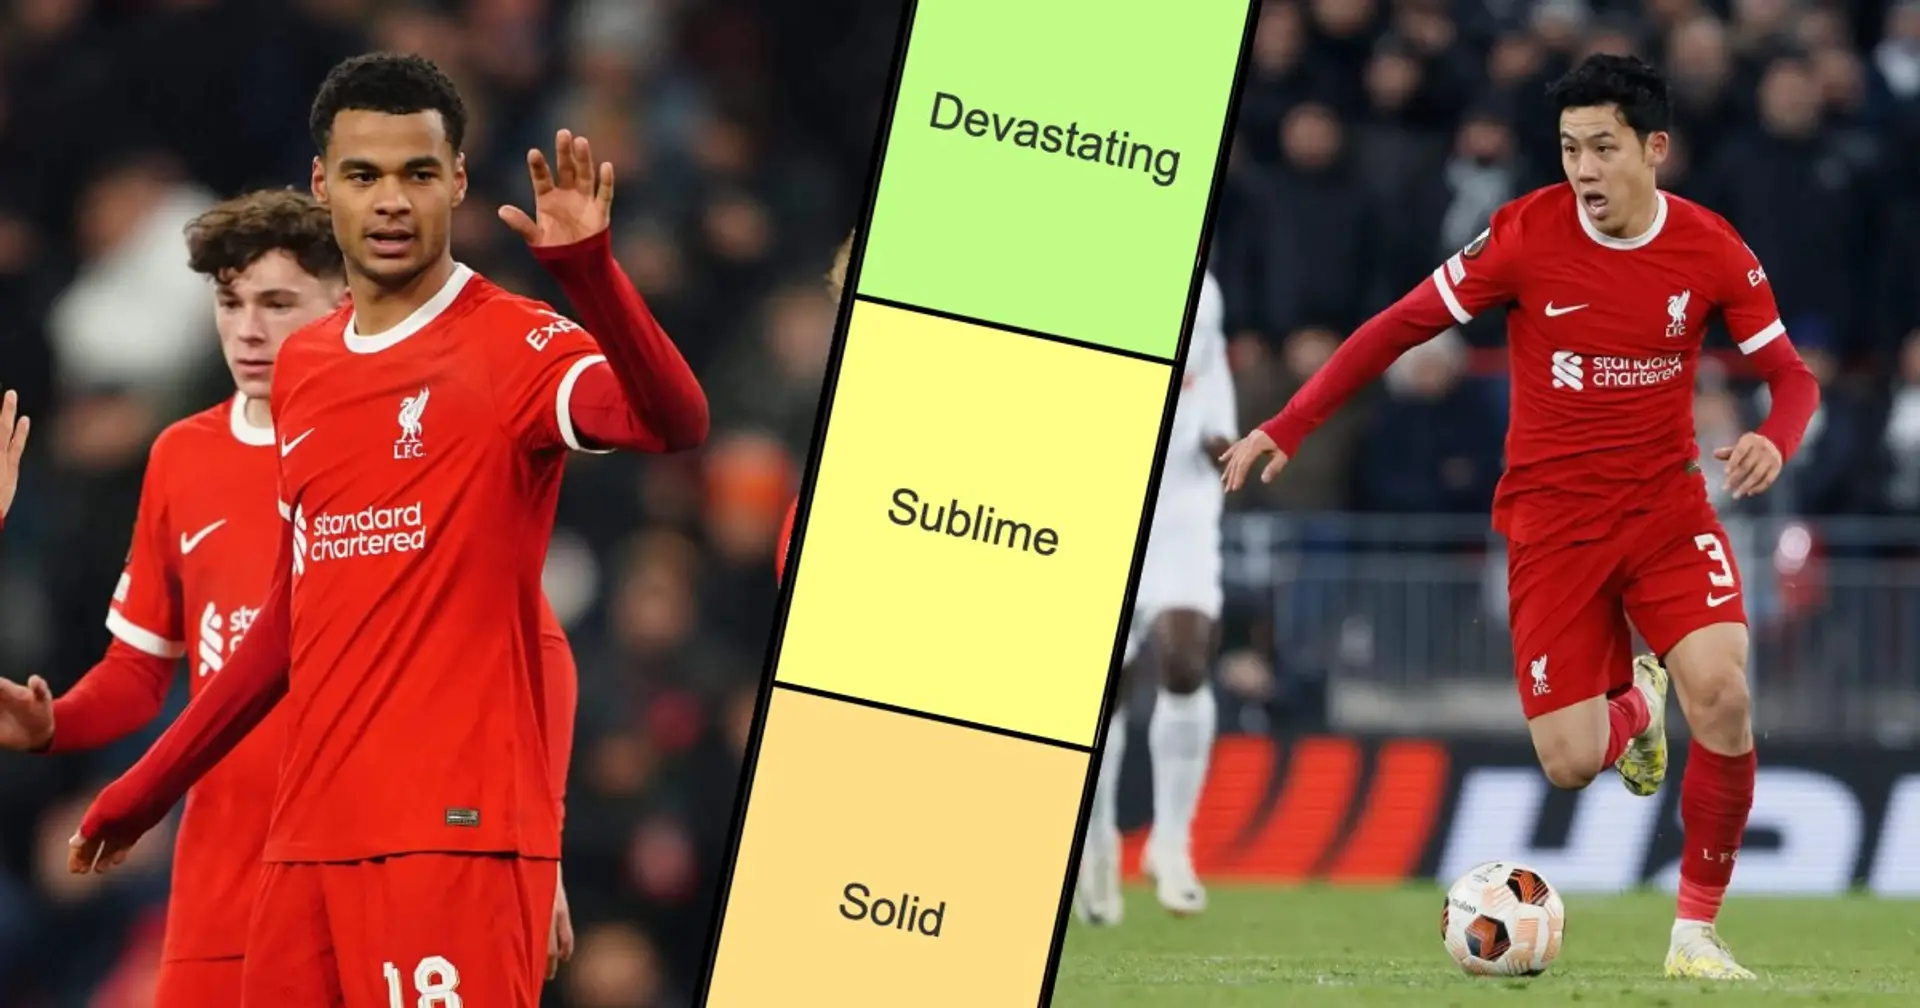 6 players 'devastating': Liverpool players' tierlist for LASK win